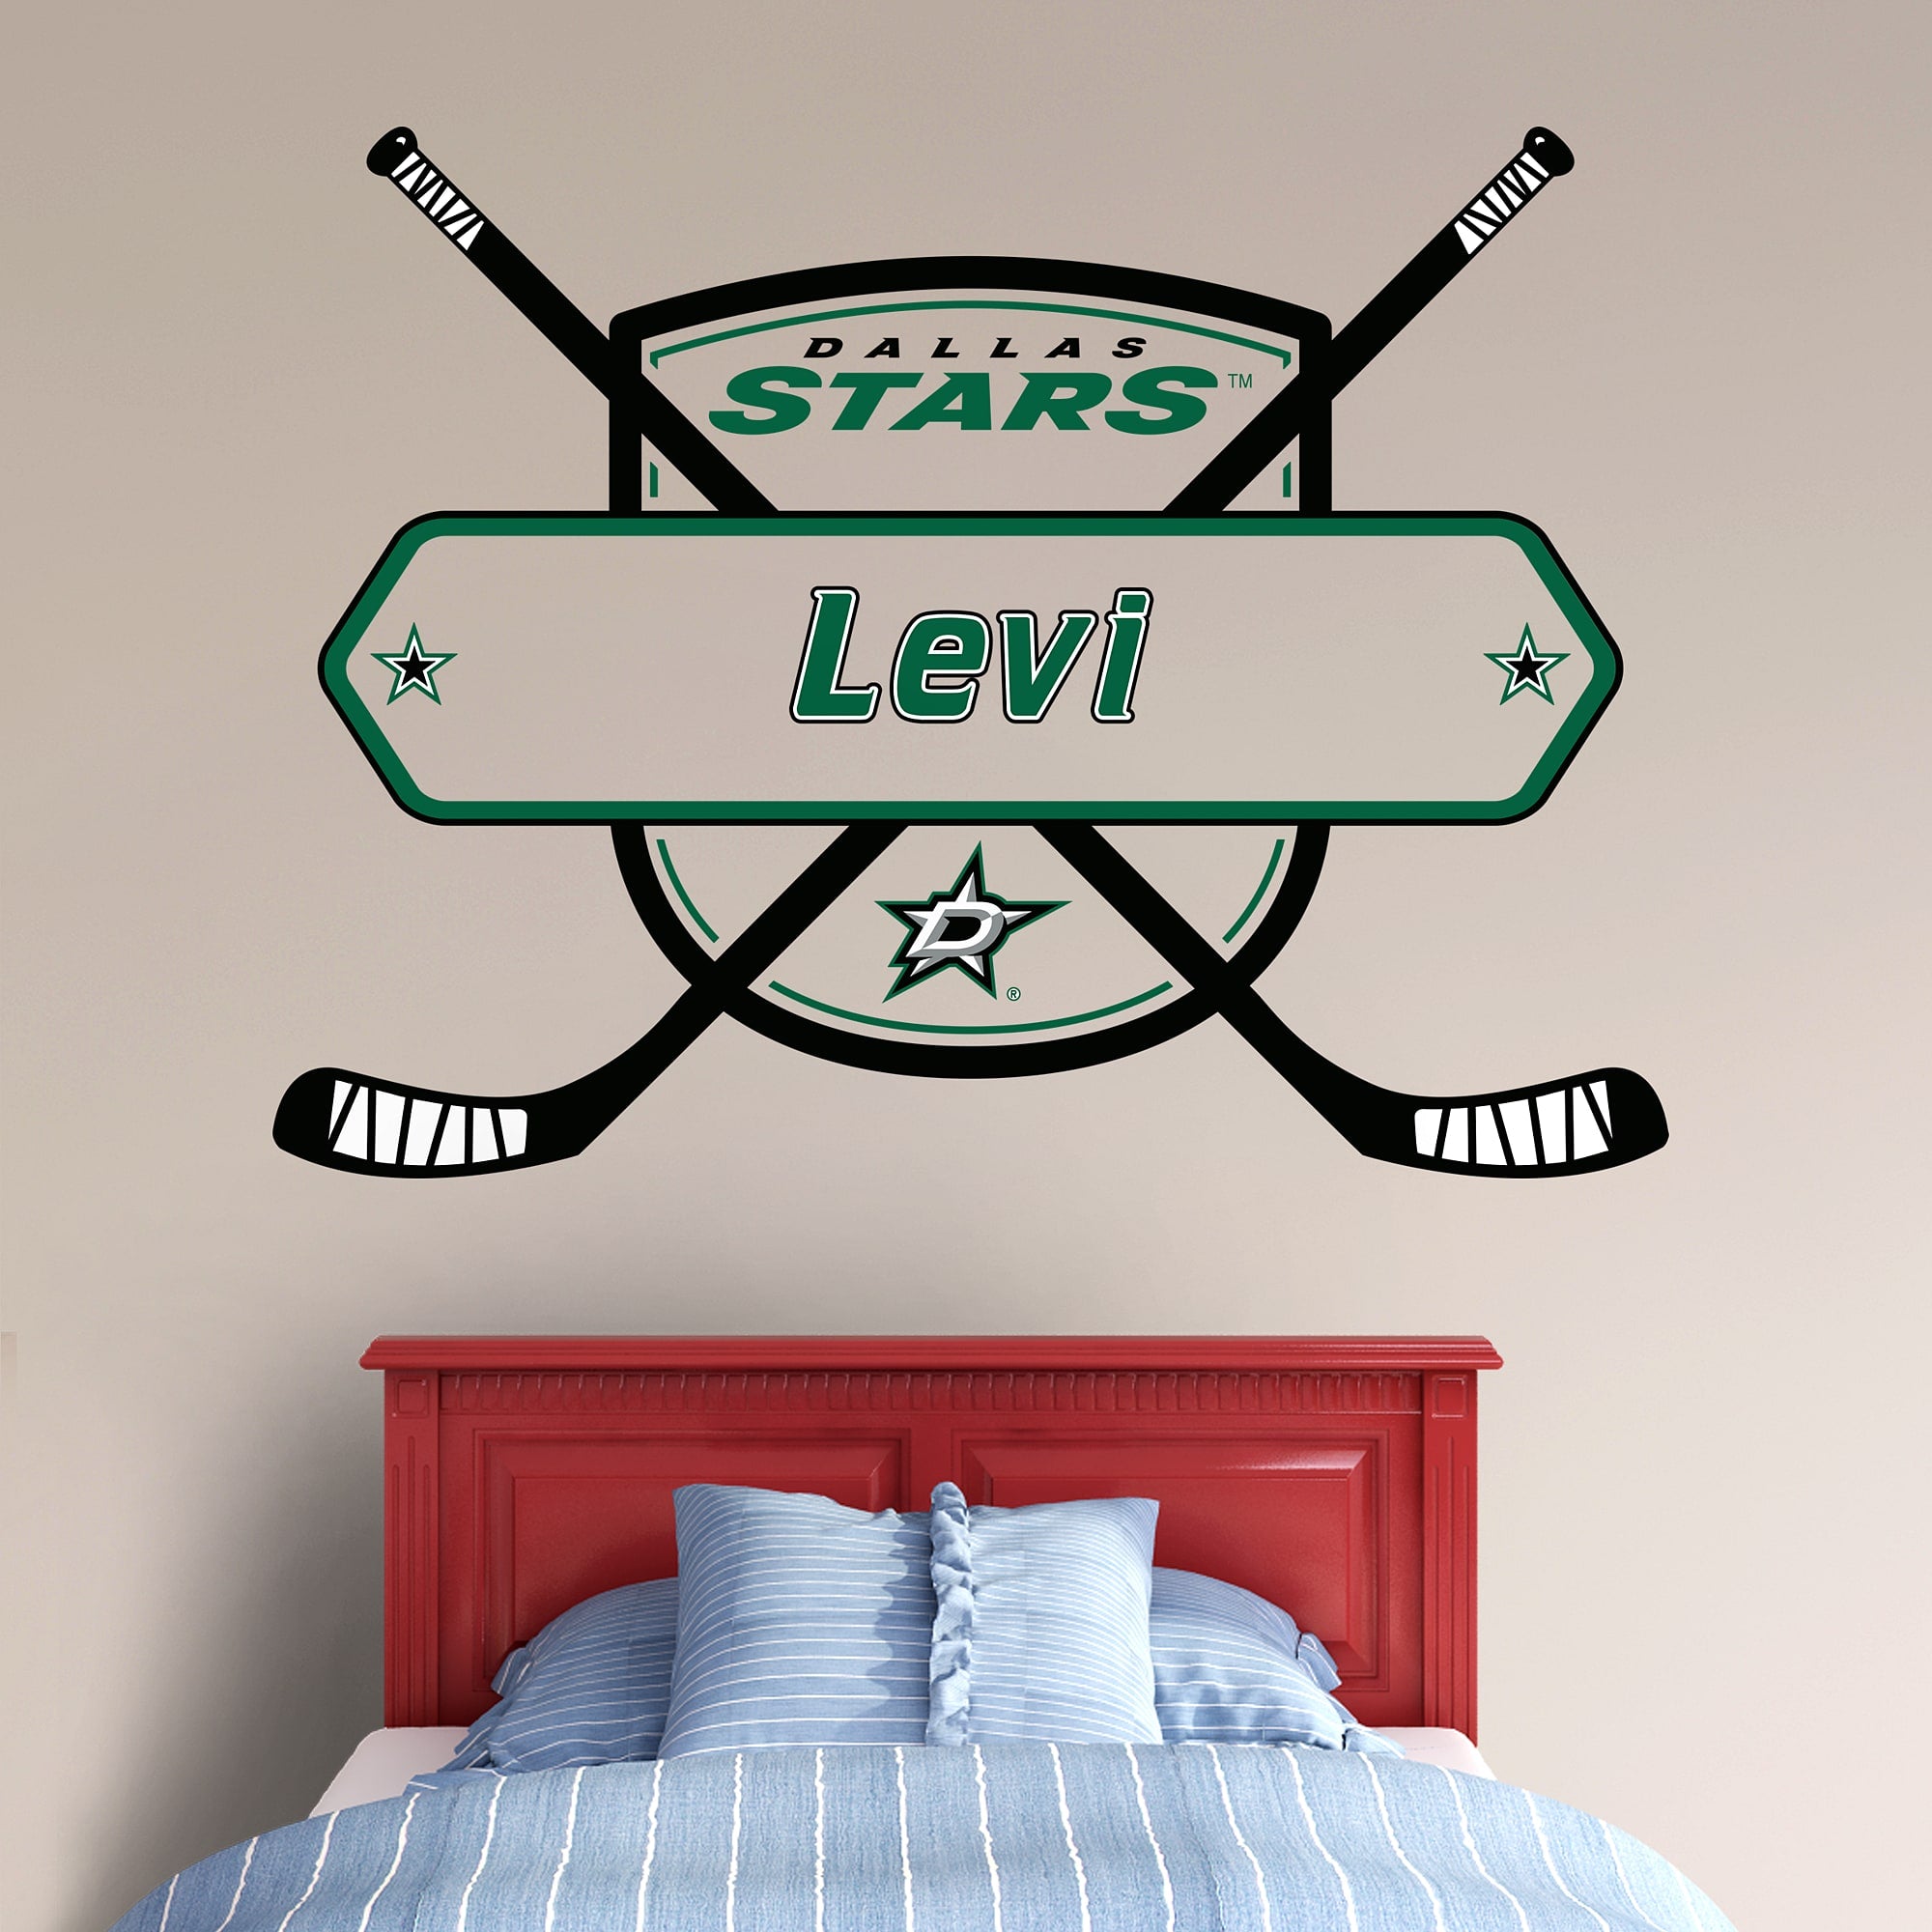 Dallas Stars: Personalized Name - Officially Licensed NHL Removable Wall Decal 51.0"W x 38.0"H by Fathead | Vinyl